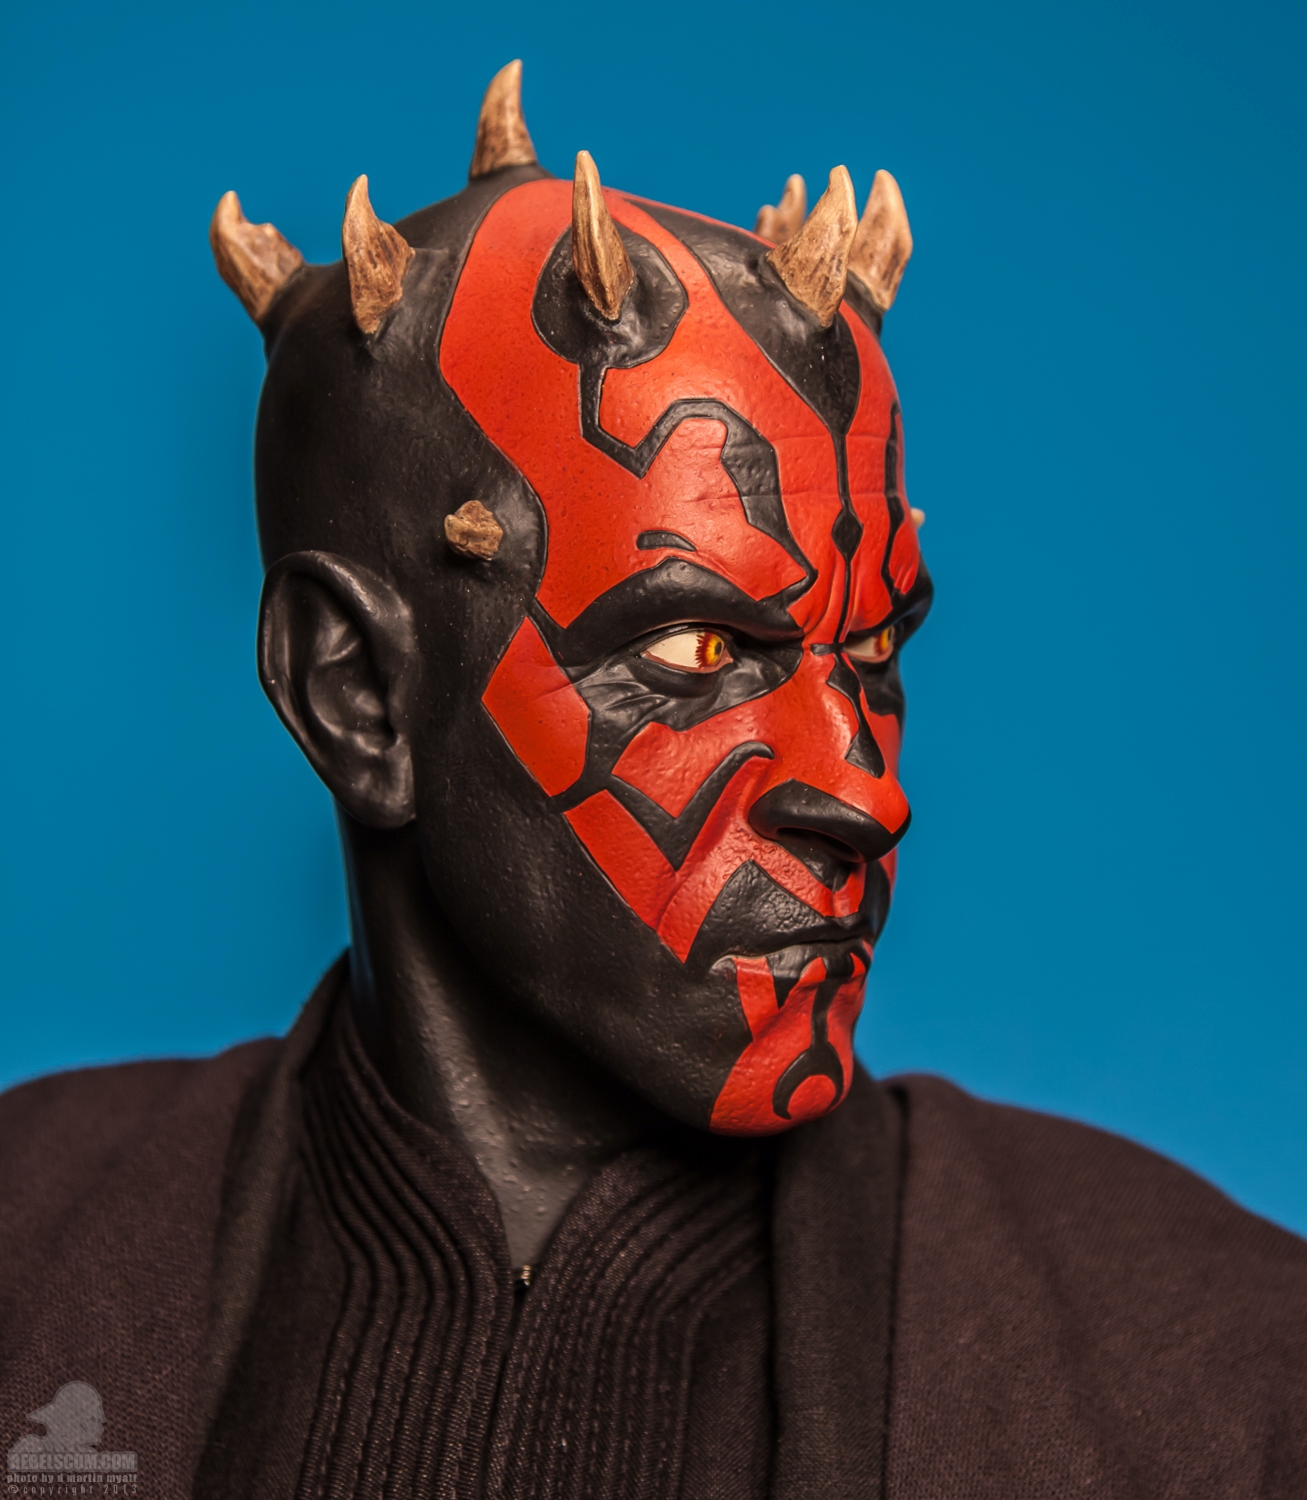 Darth_Maul_Legendary_Scale_Figure_Sideshow_Collectibles-14.jpg